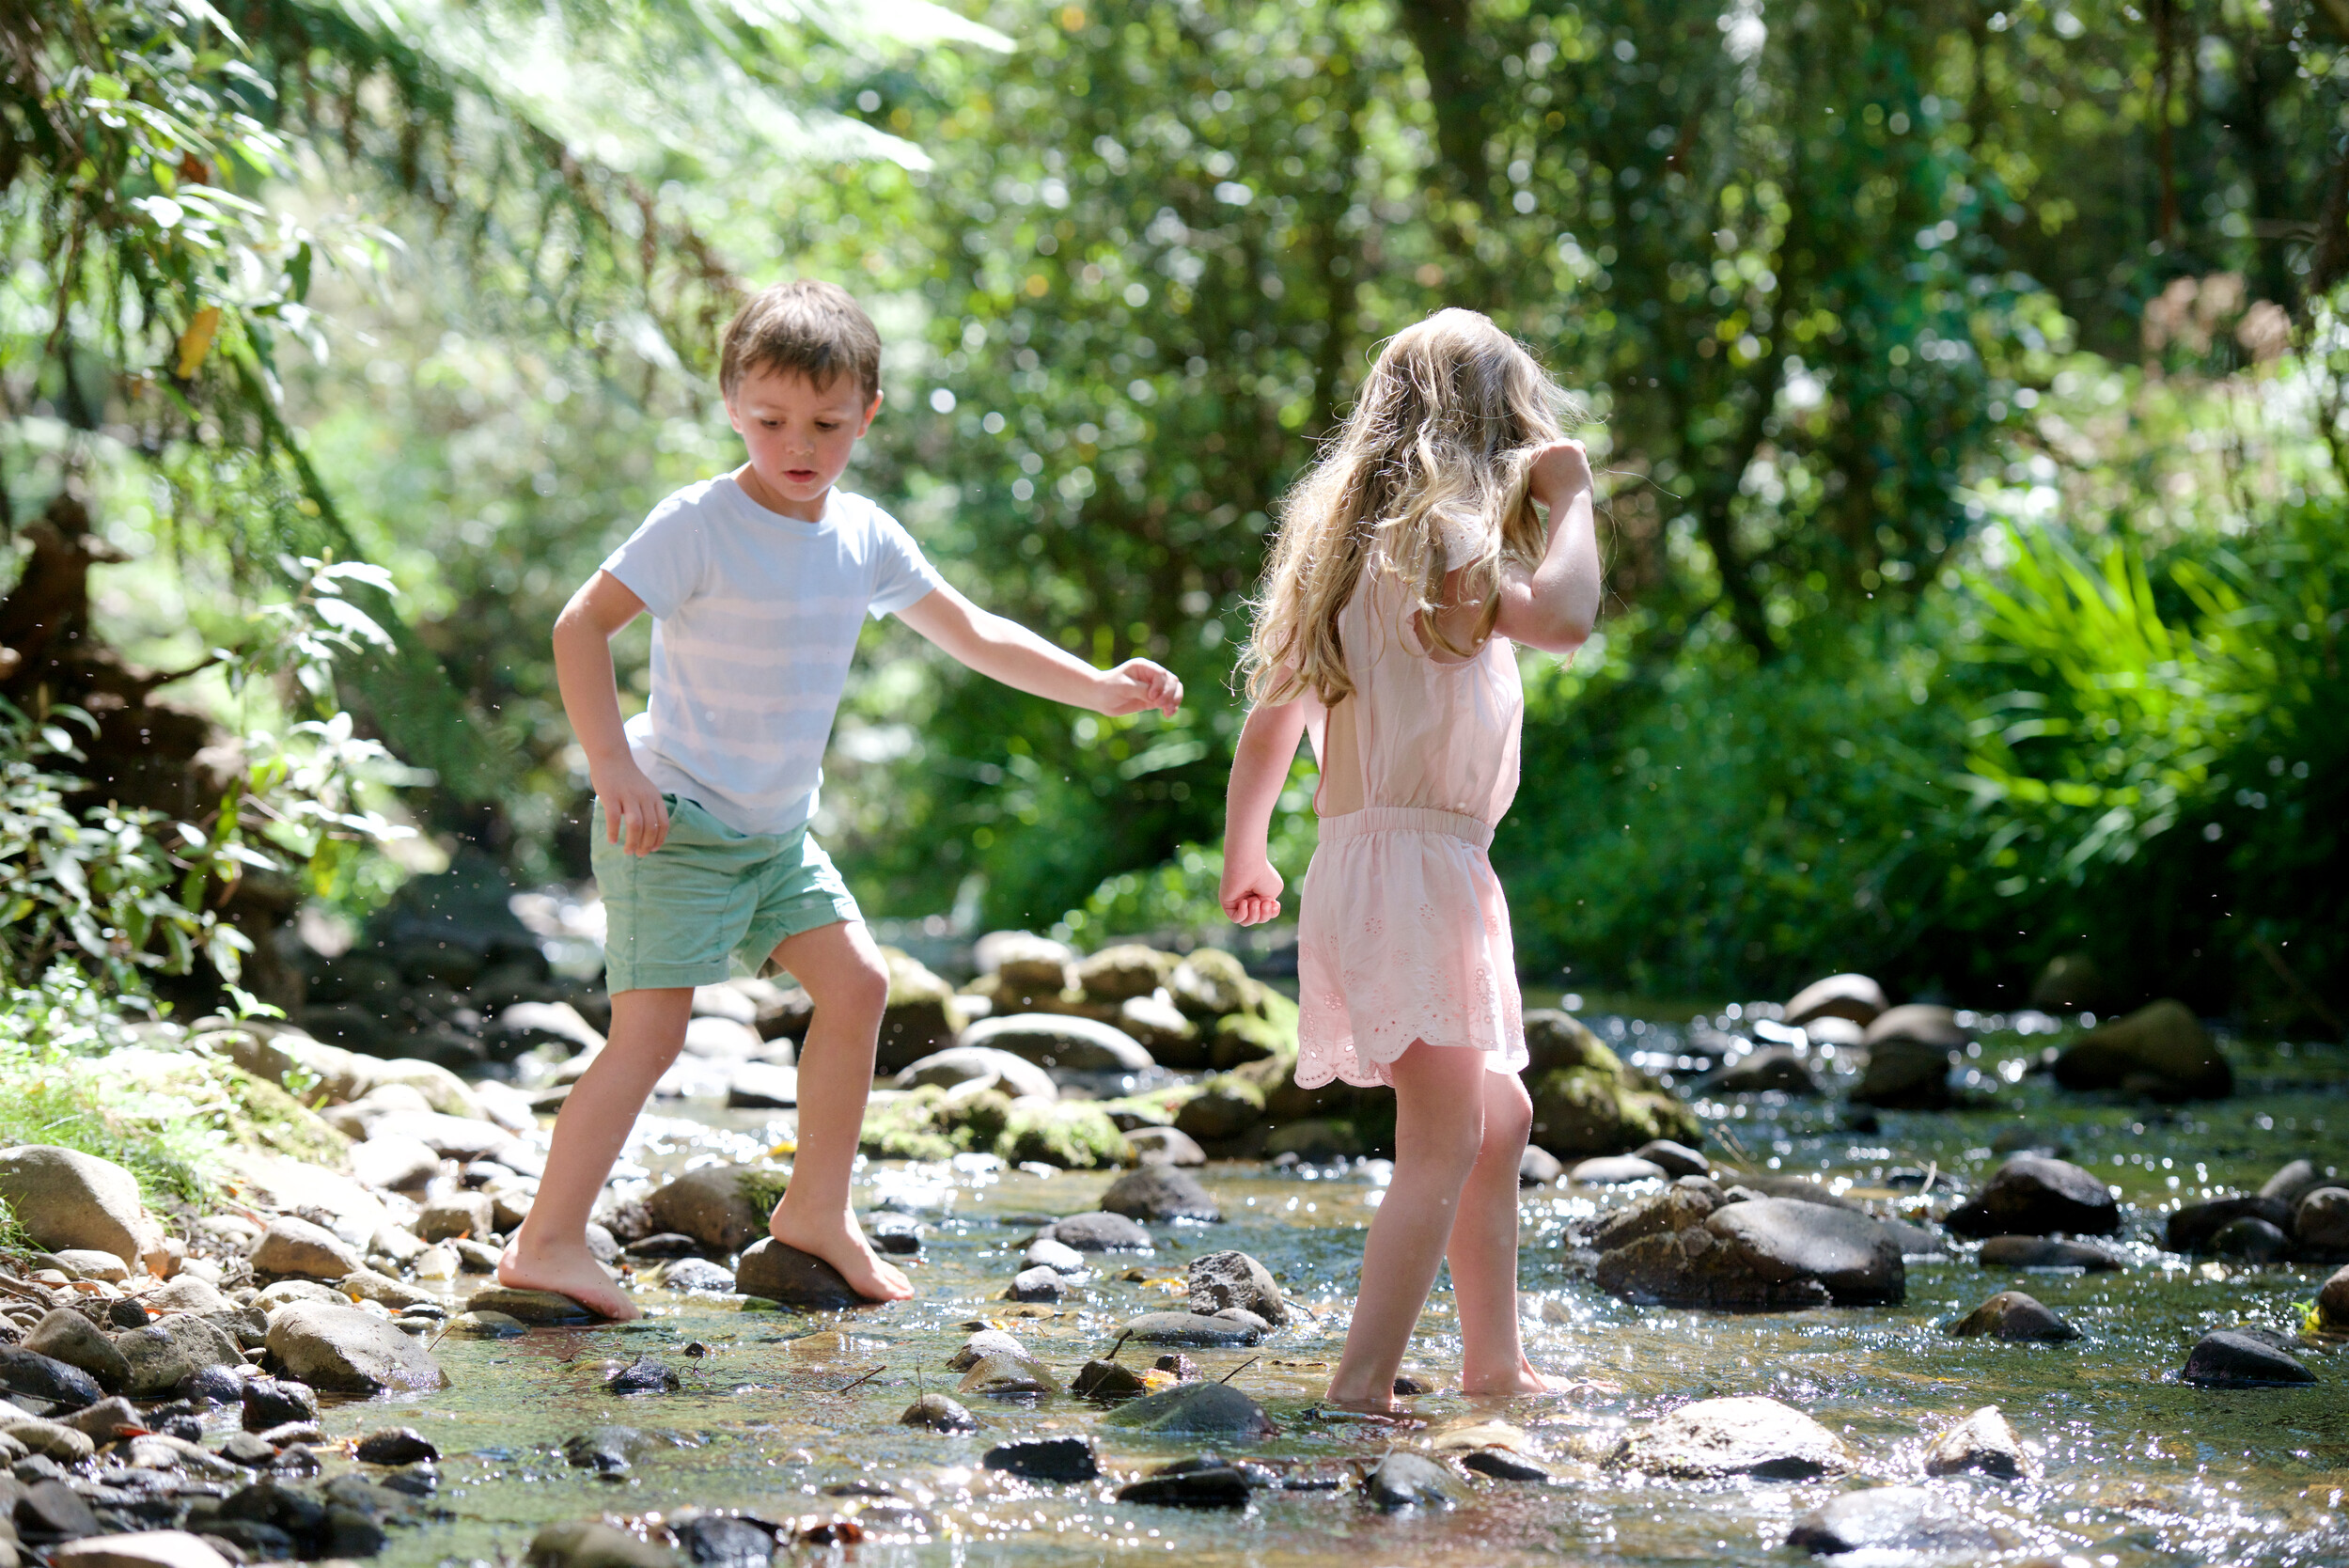 A young boy and a young girl play in a creek on a sunny day.